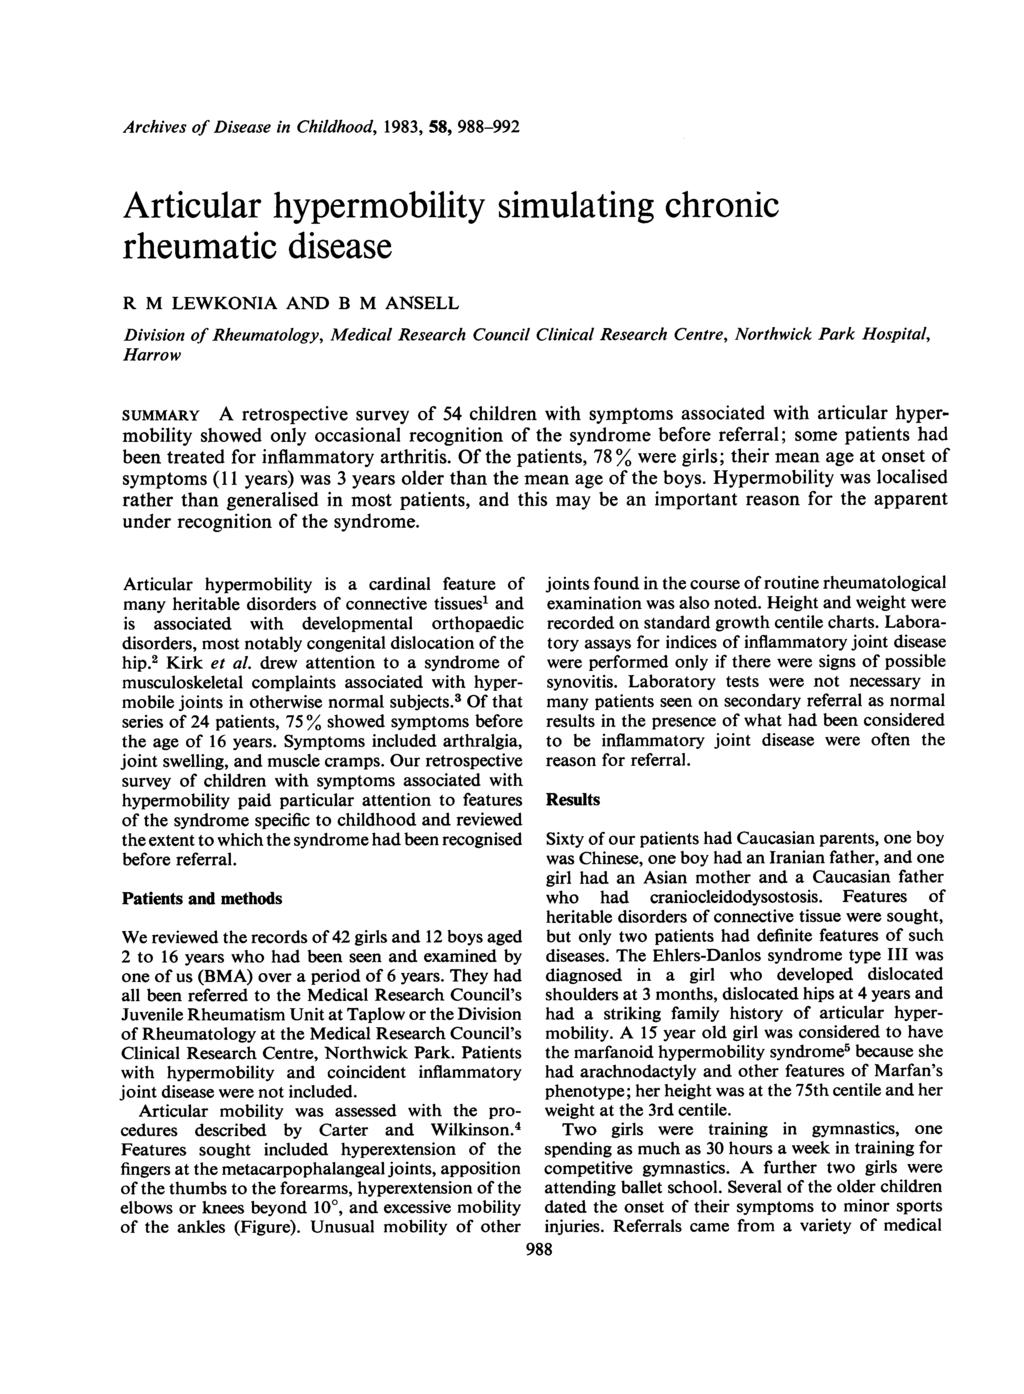 Archives of Disease in Childhood, 1983, 58, 988-992 Articular hypermobility simulating chronic rheumatic disease R M LEWKONIA AND B M ANSELL Division of Rheumatology, Medical Research Council